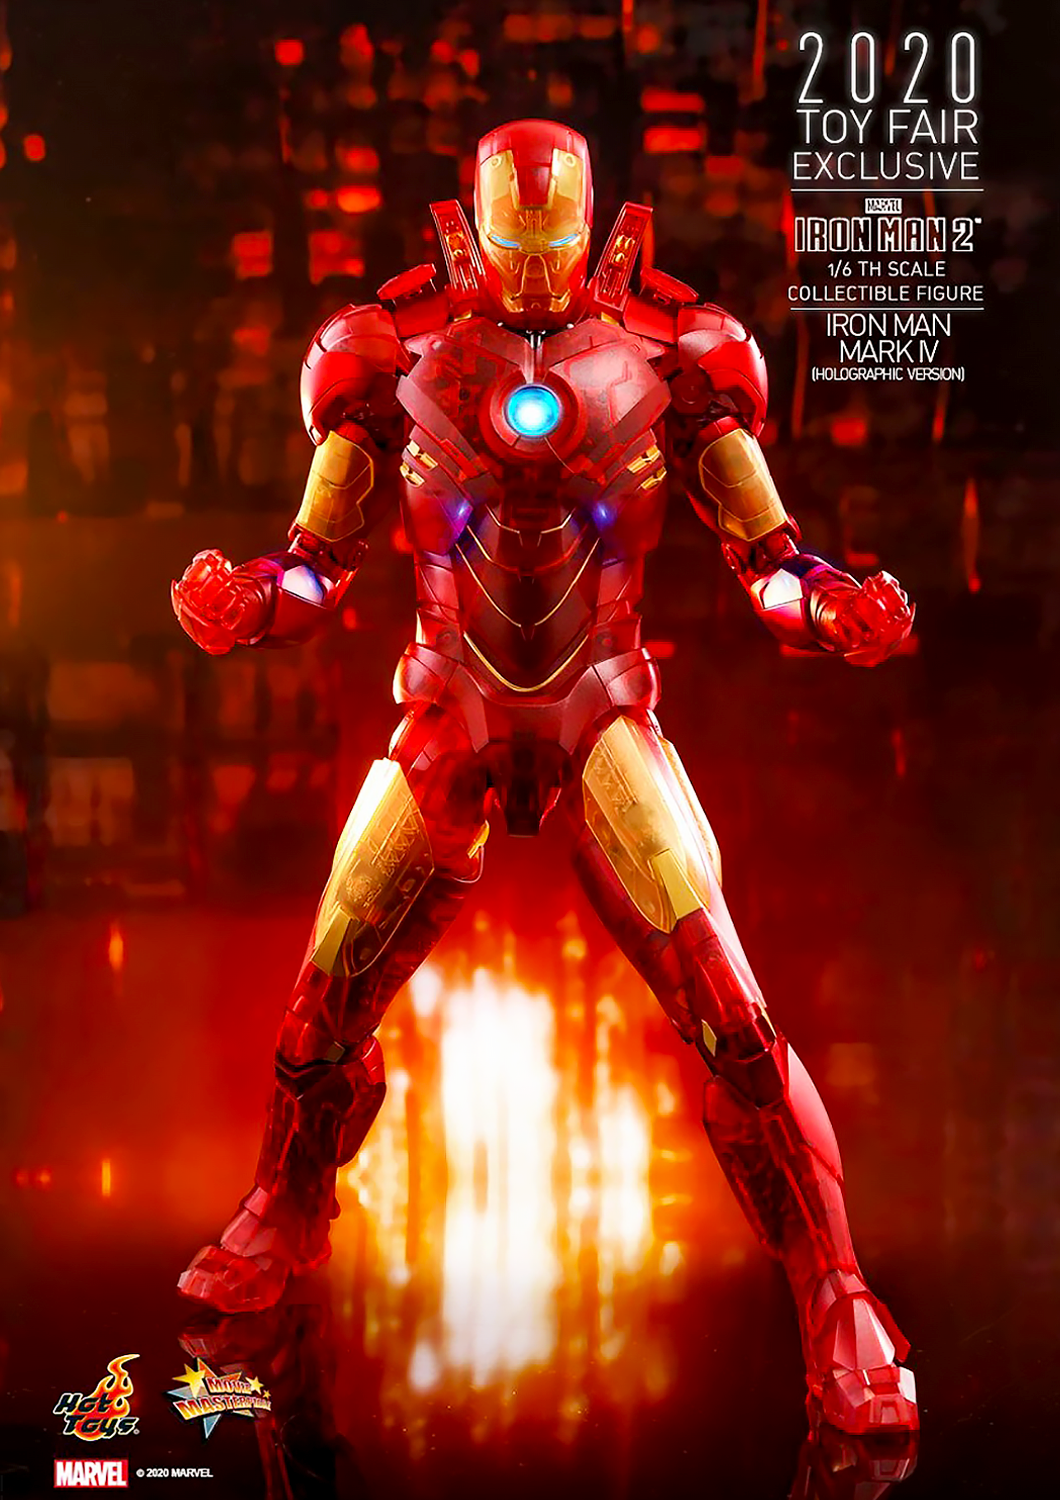 IRON MAN 2 MARK IV HOLOGRAPHIC VERSION 1/6TH SCALE COLLECTIBLE